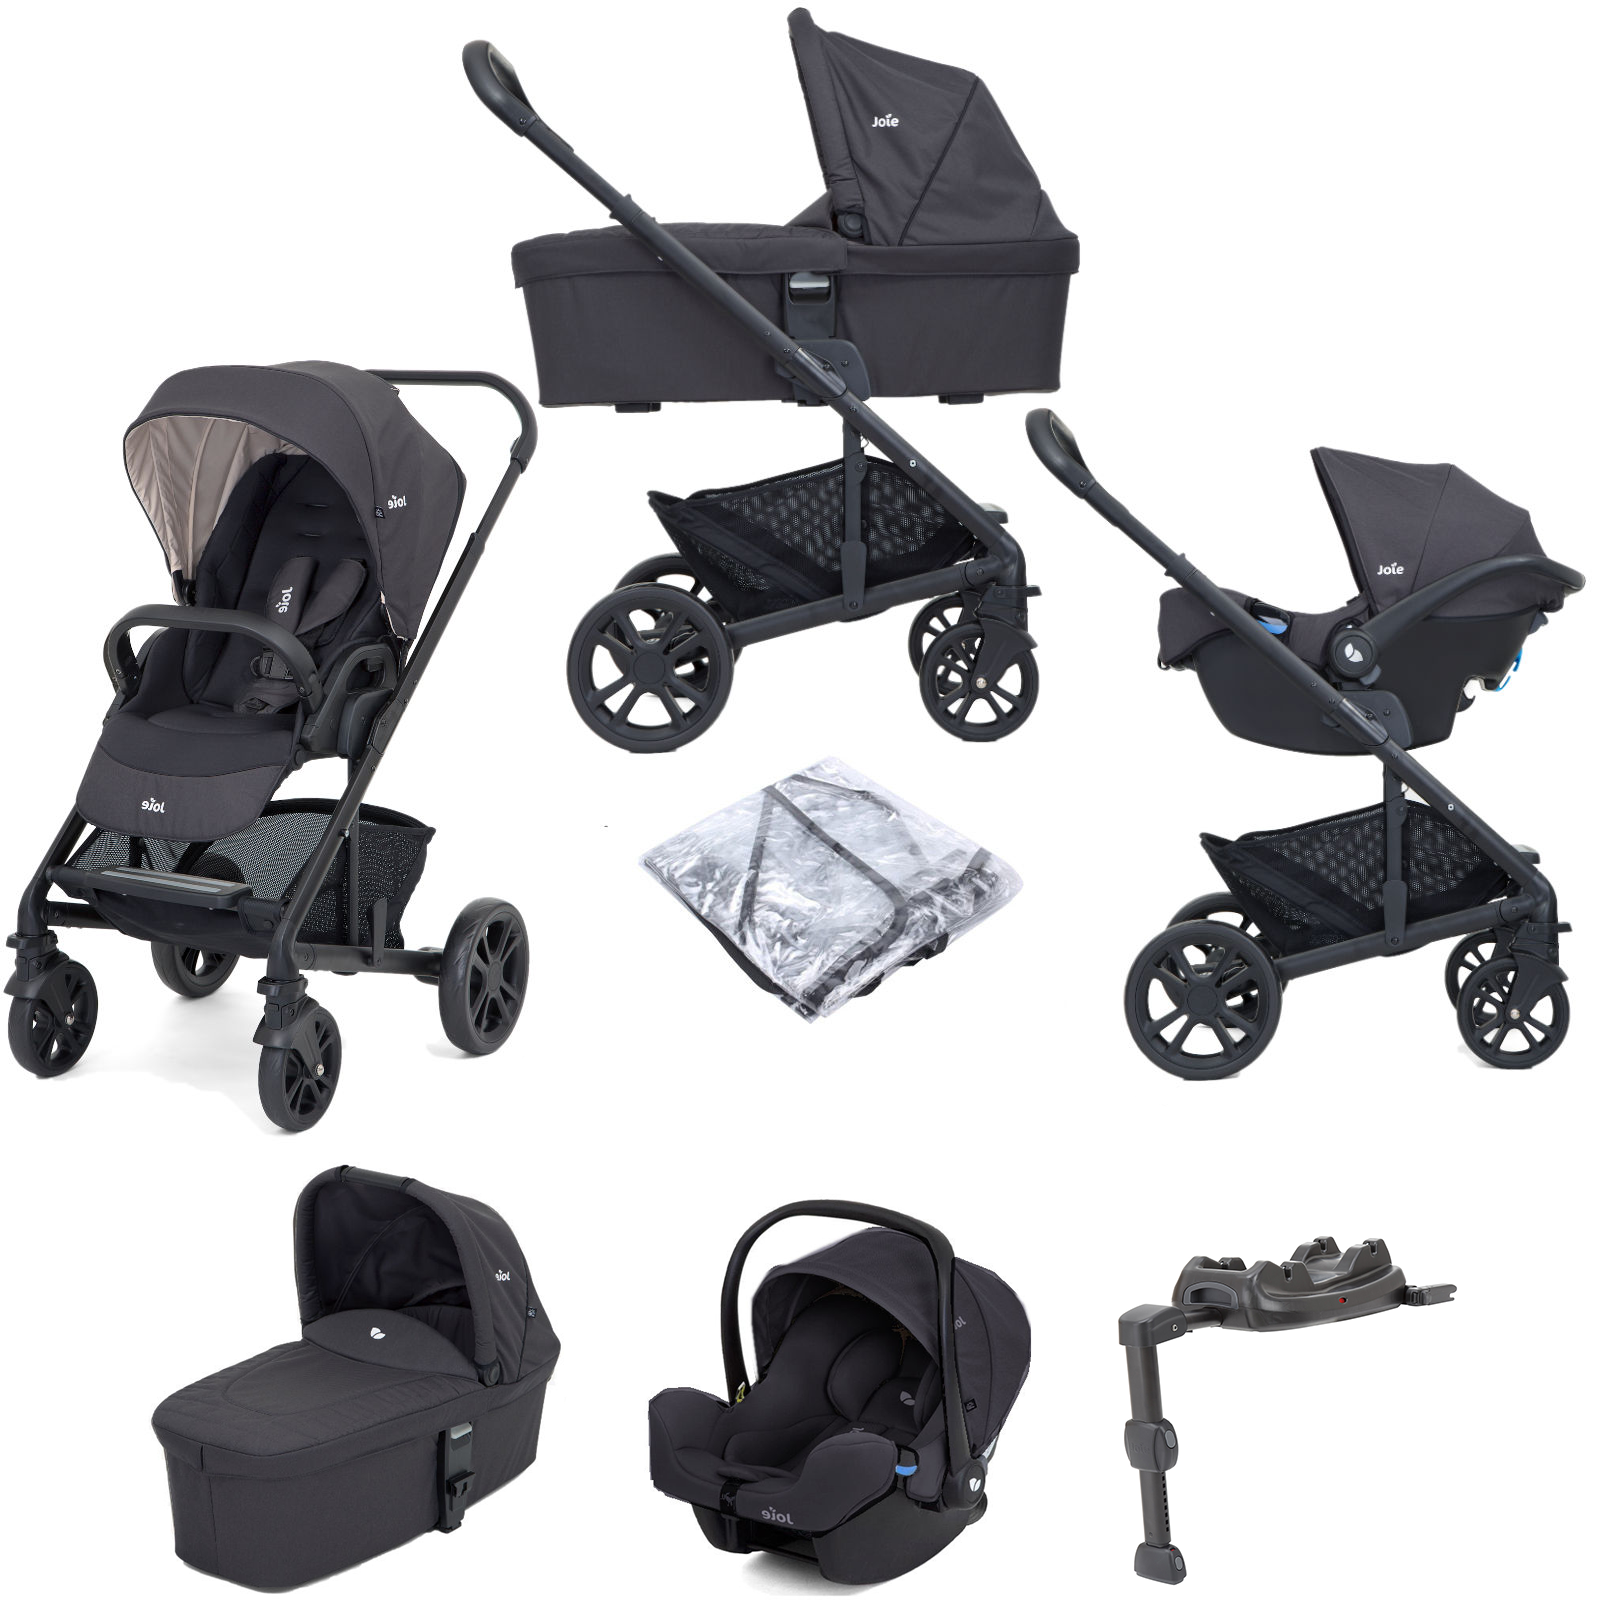 Joie Chrome Trio (I-Snug2) Travel System With Carrycot & ISOFIX Base - Ember